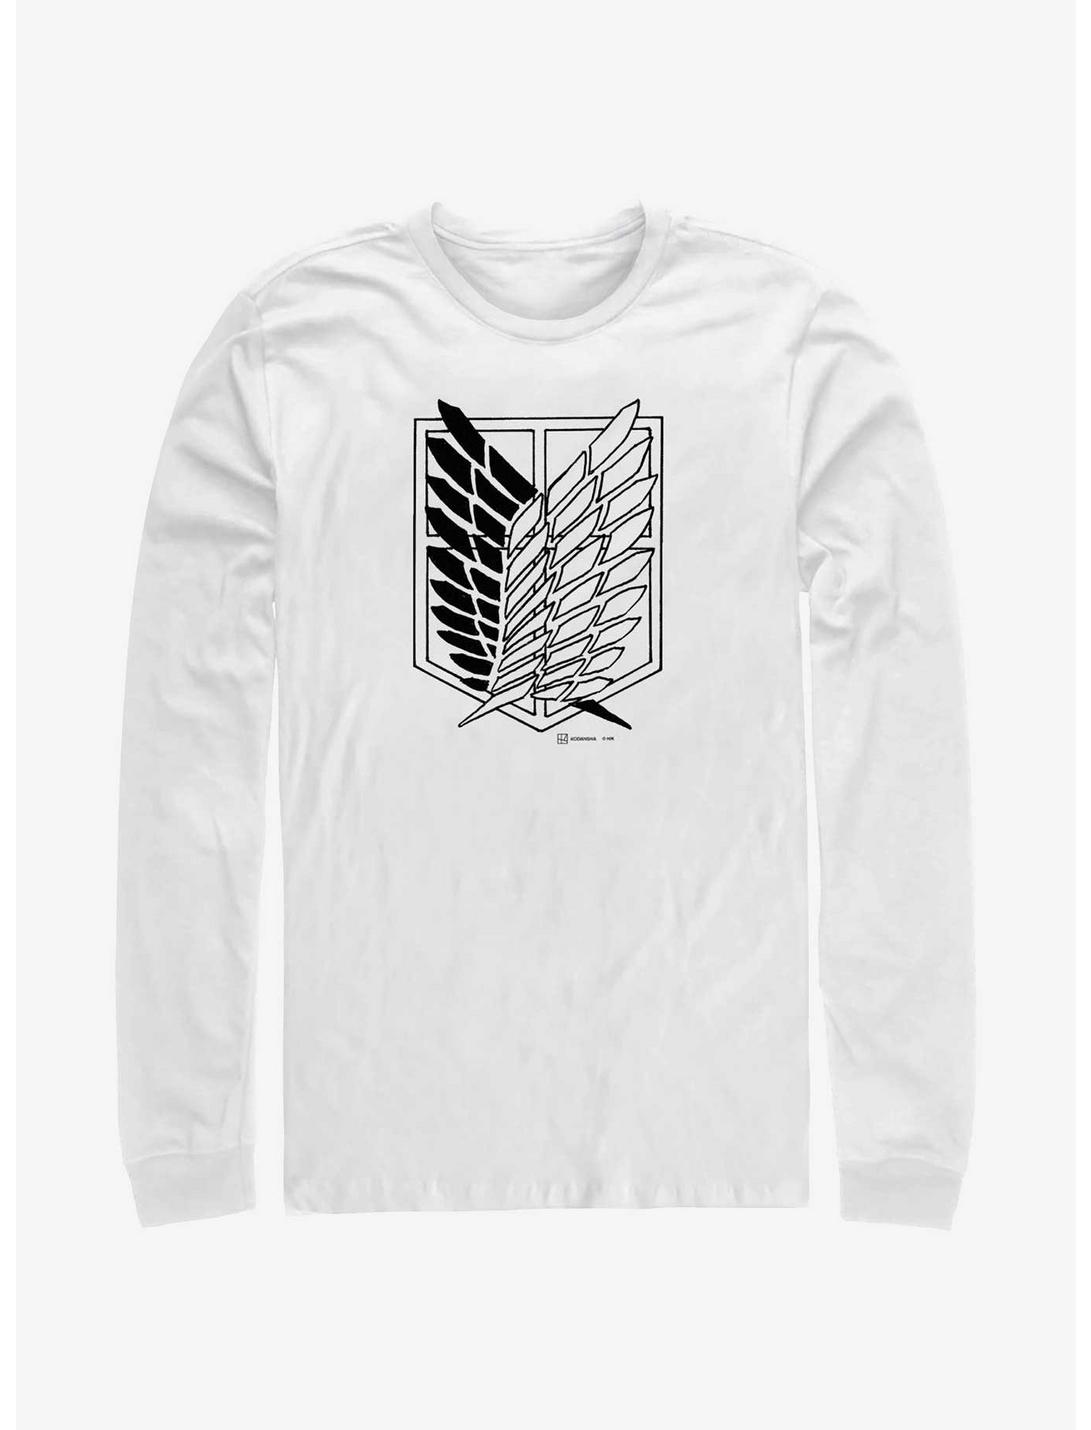 Attack On Titan Scout Regiment Long-Sleeve T-Shirt, WHITE, hi-res